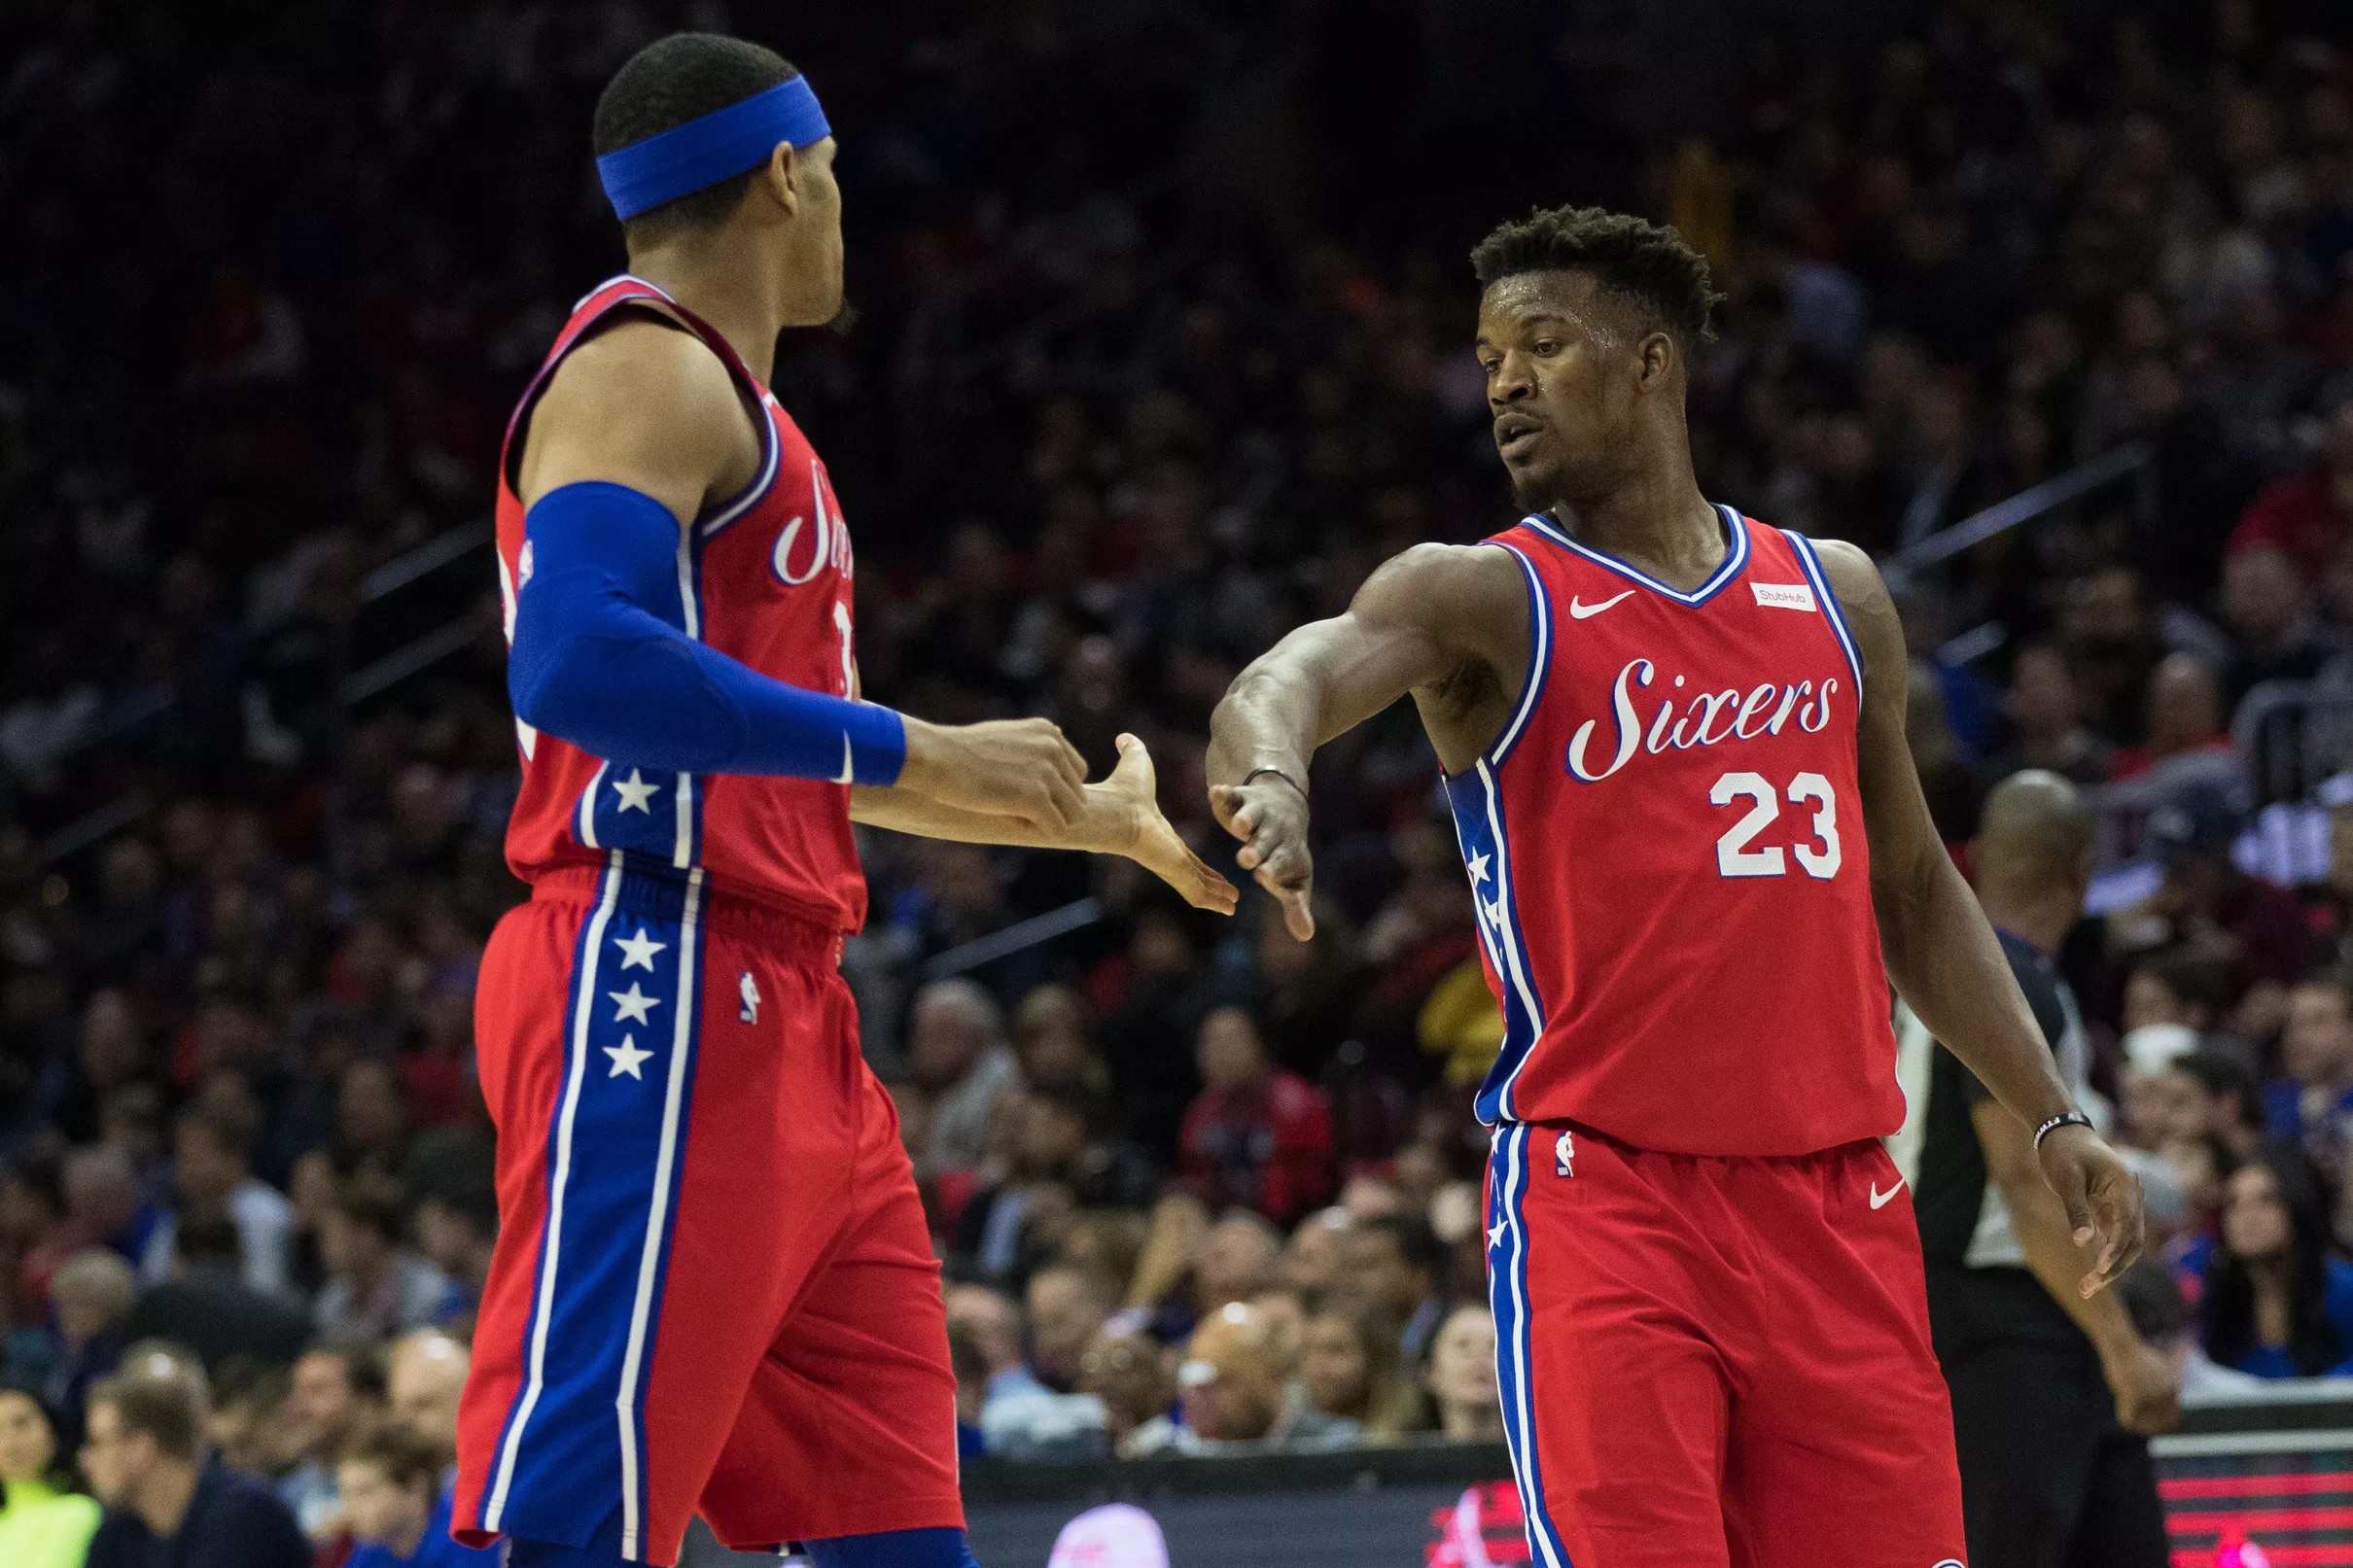 Sixers Free Agency Primer An indepth look at salary cap implications